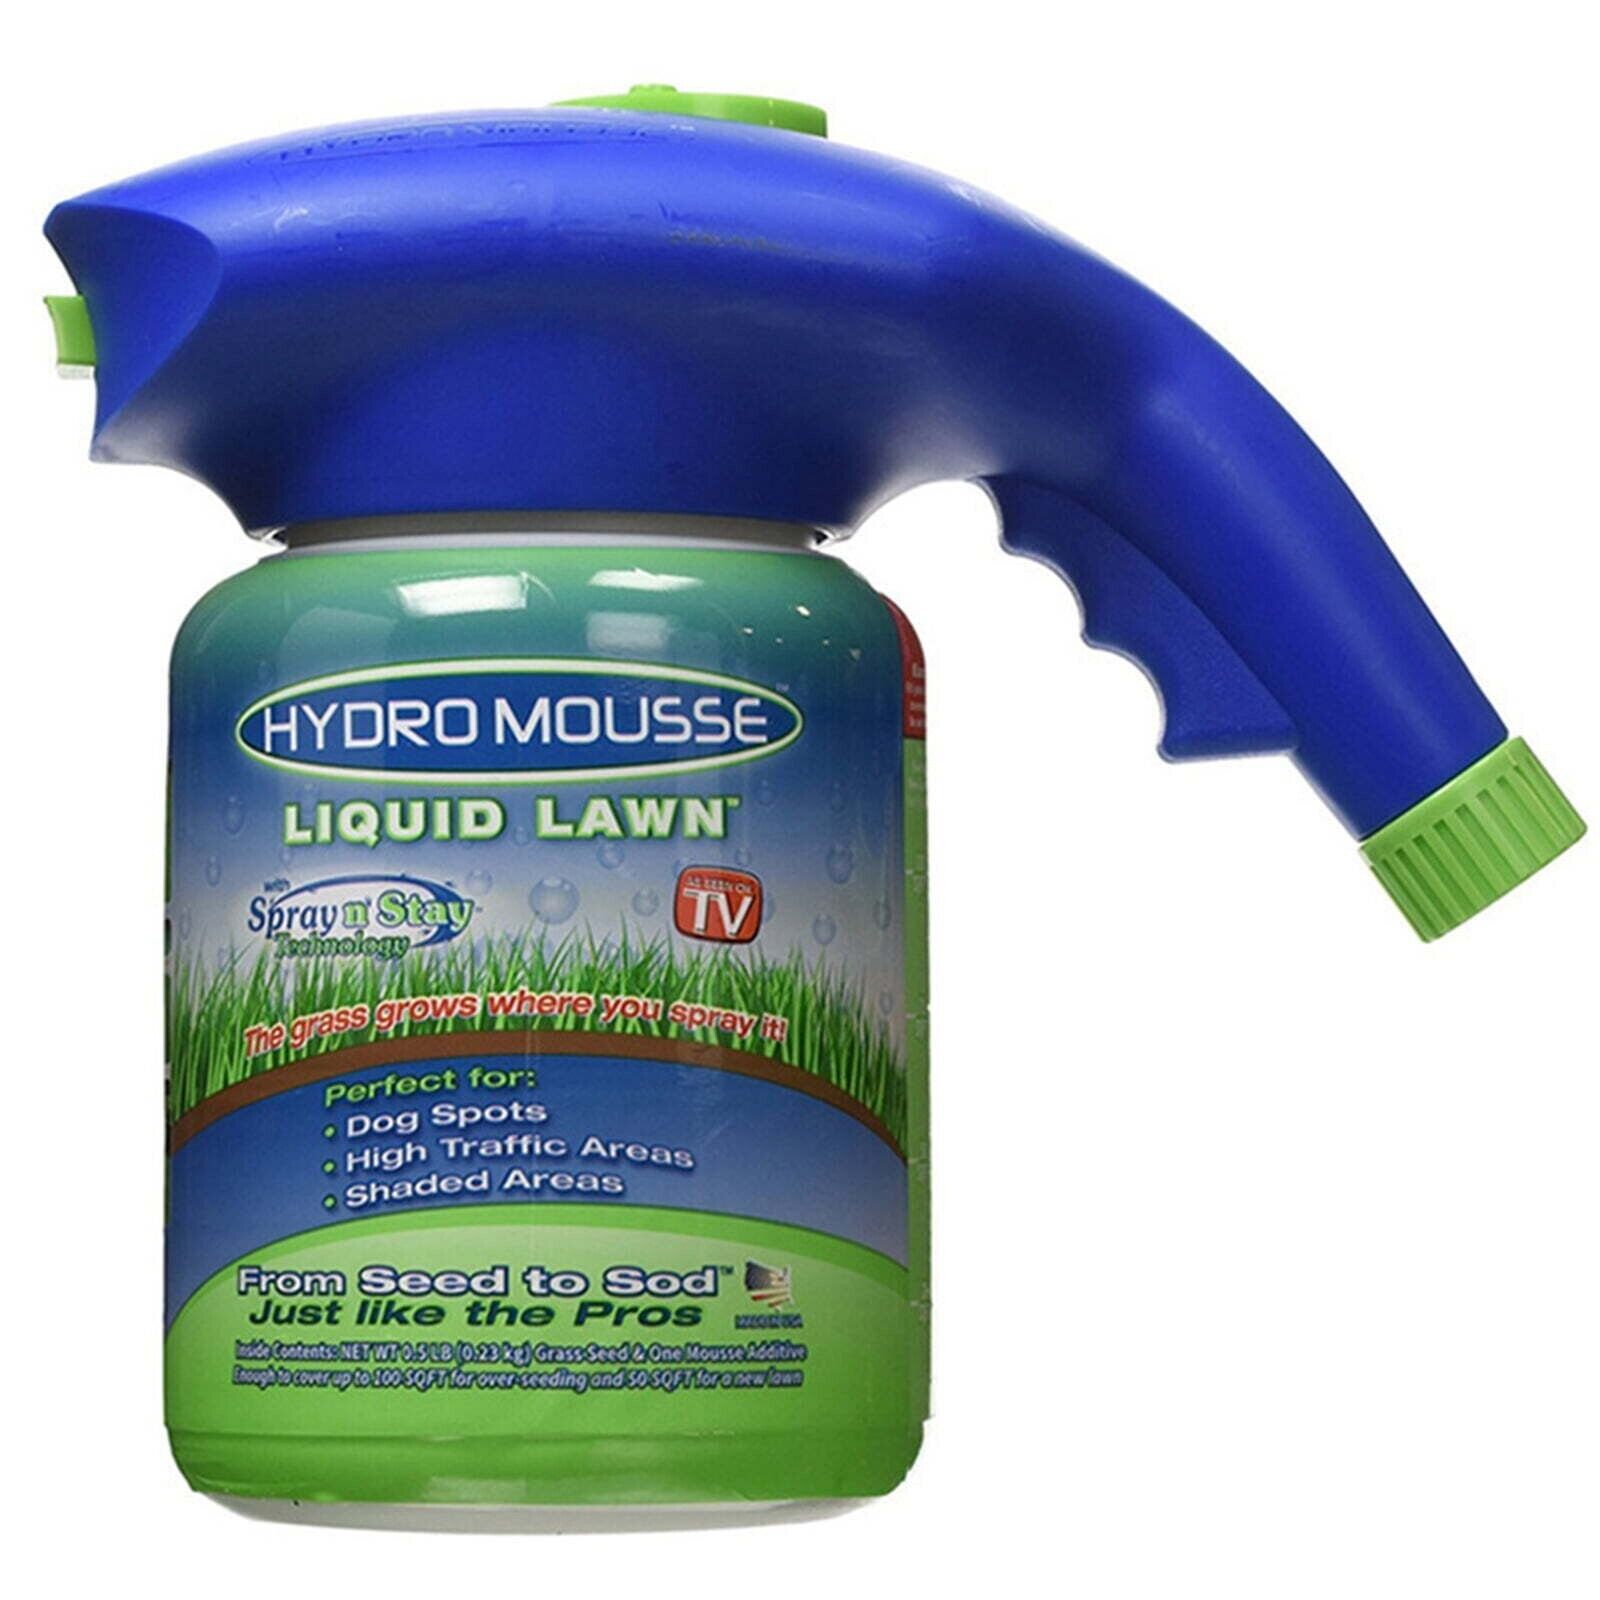 Hydro Mousse Liquid Lawn System - Grow Grass Where You Spray It - Made in China